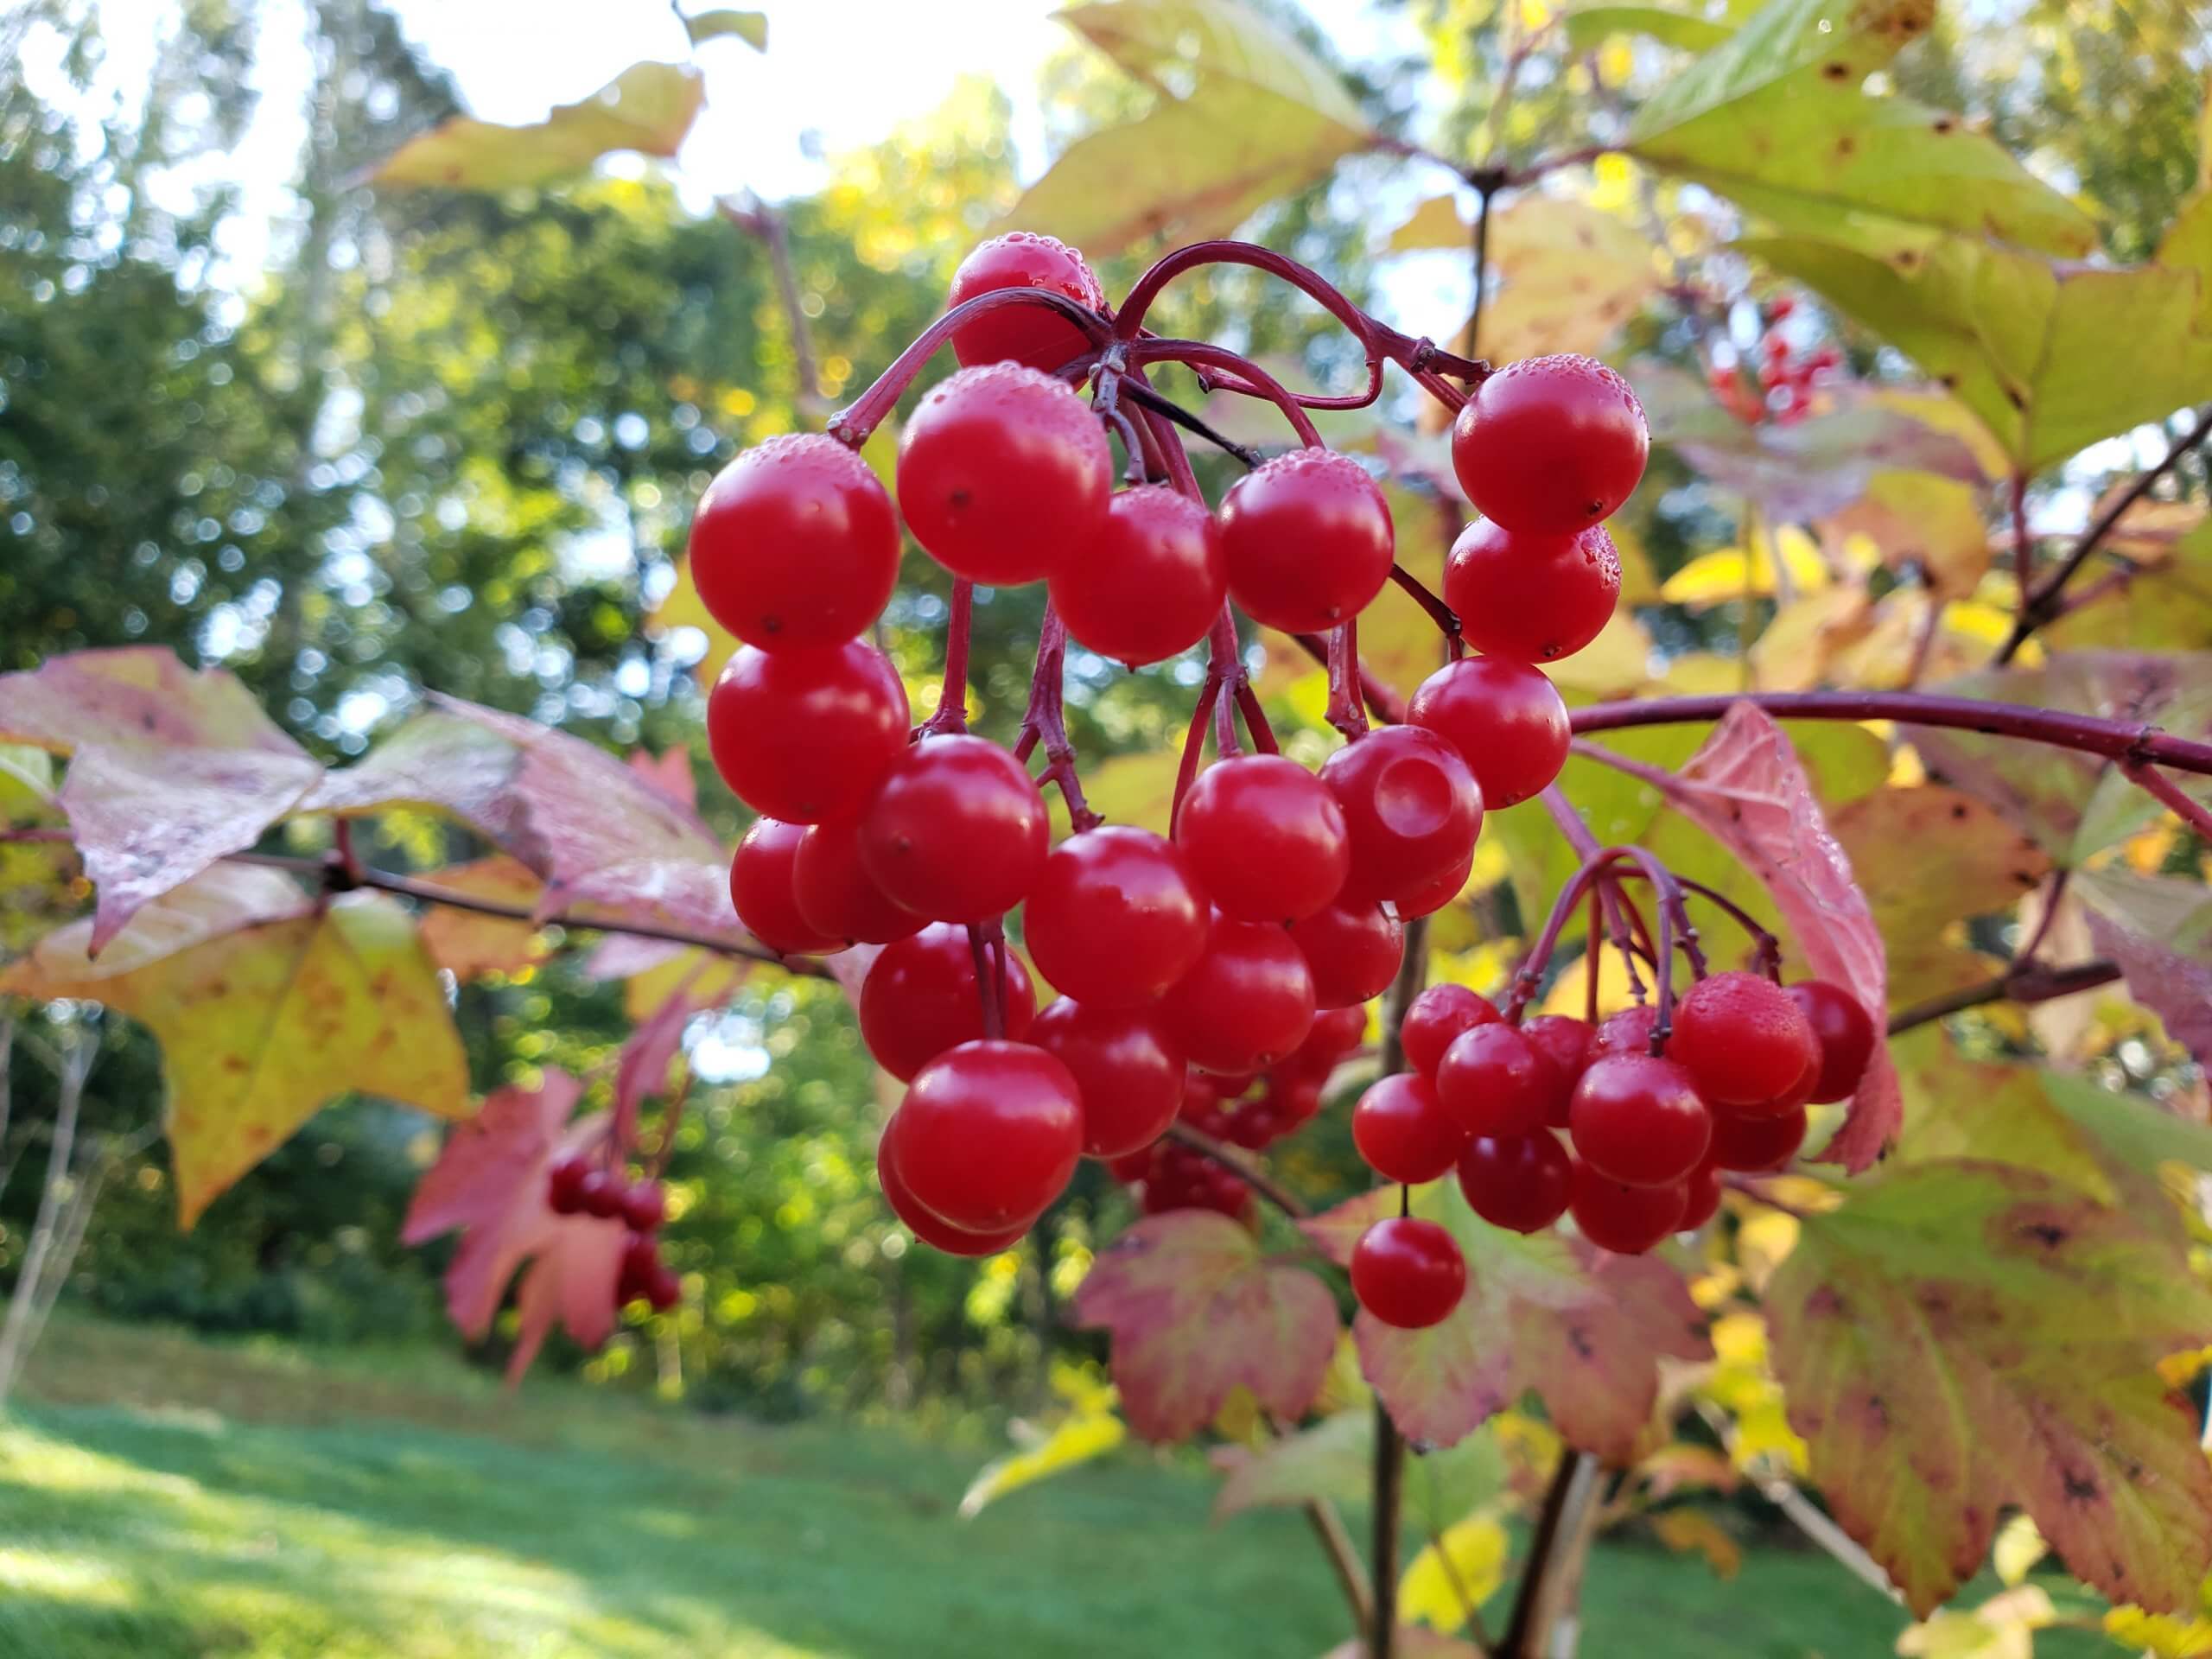 A close up of a cluster of bright red American Crannberrybush berries